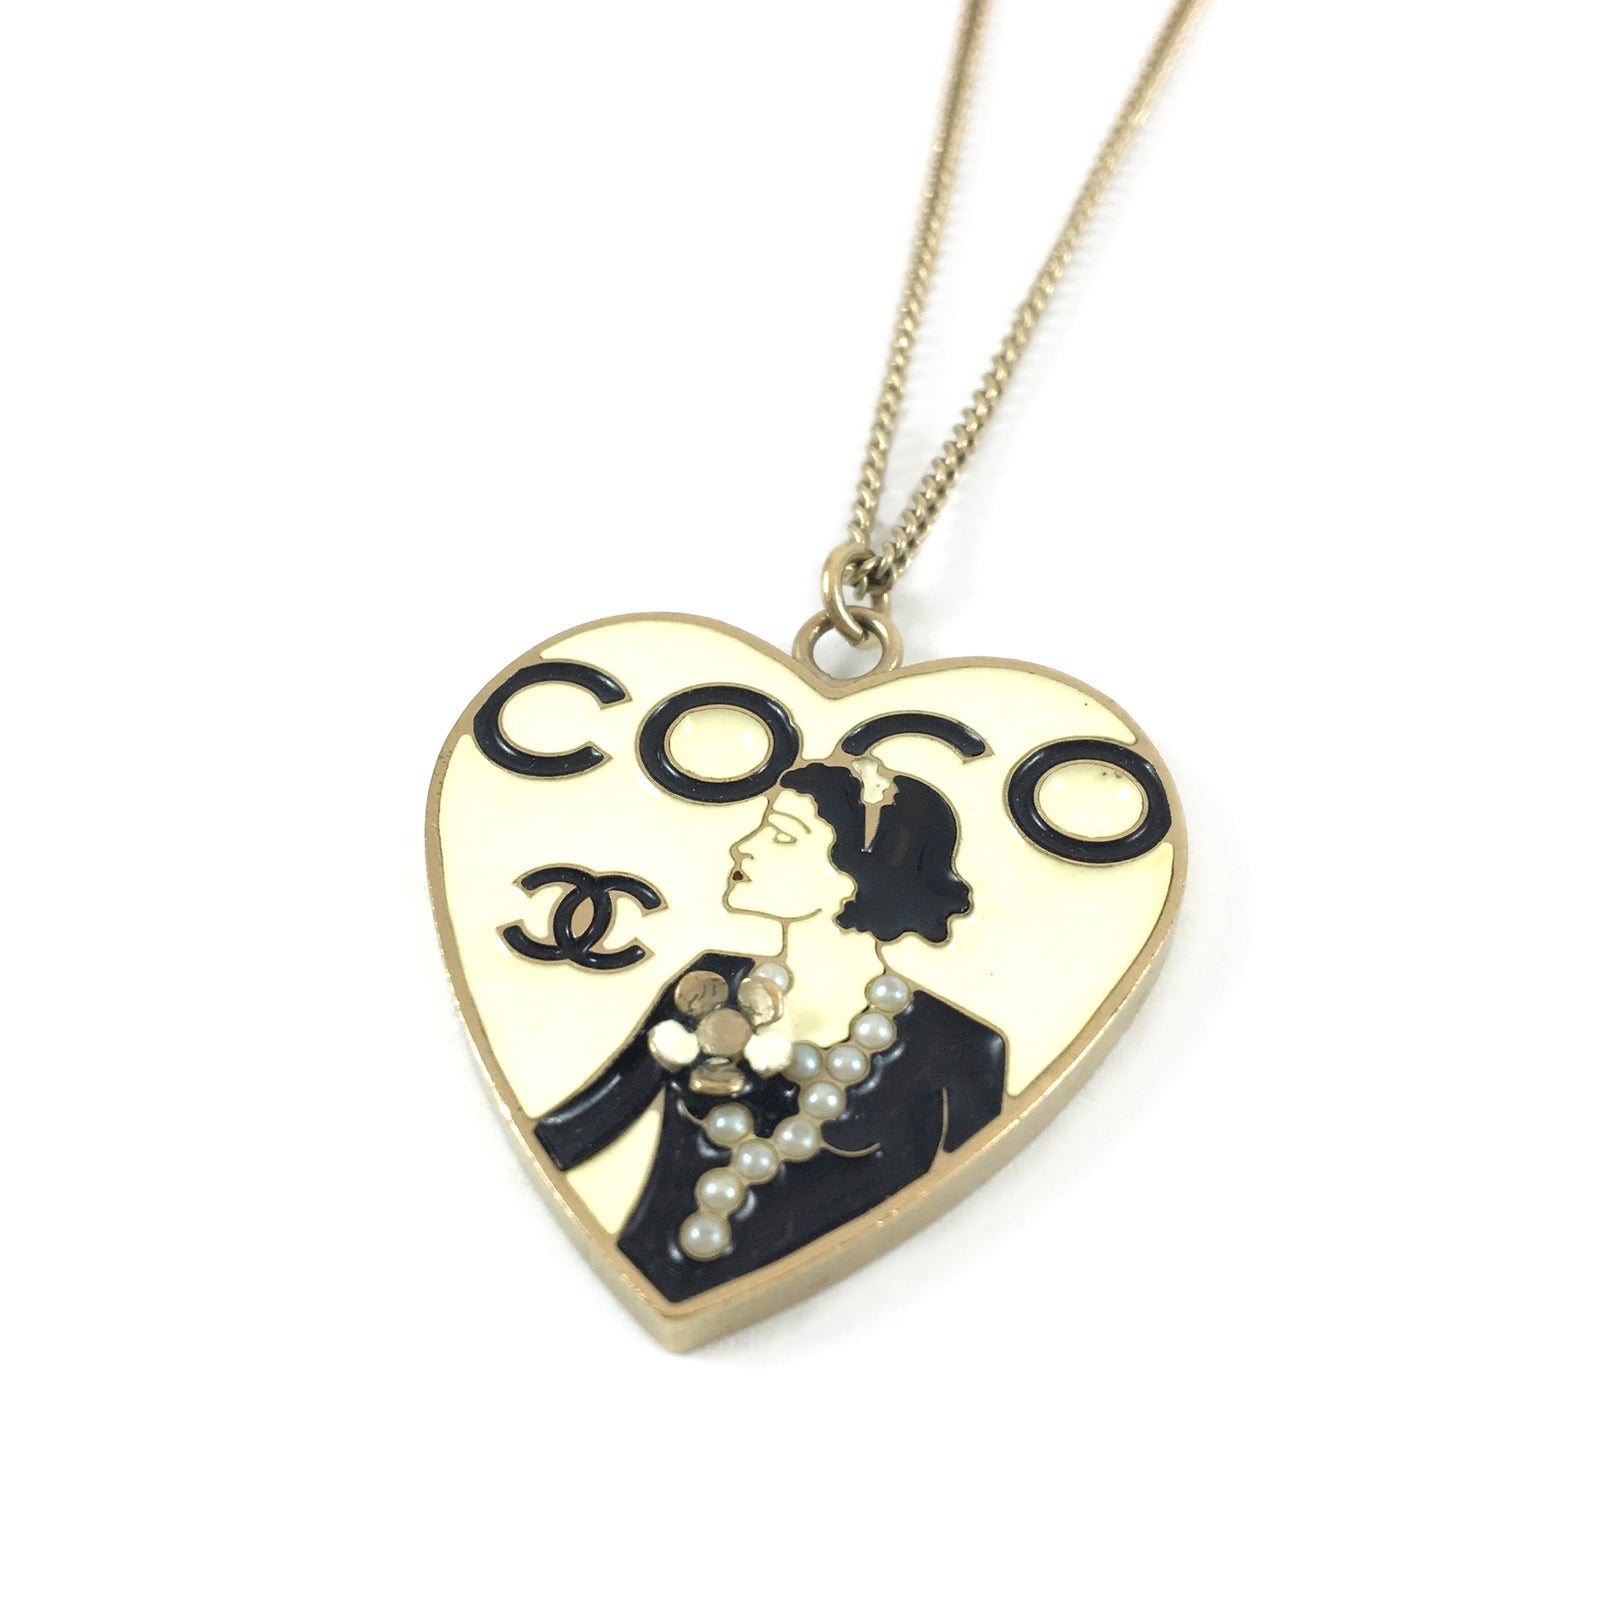 Coco Chanel Heart Necklace